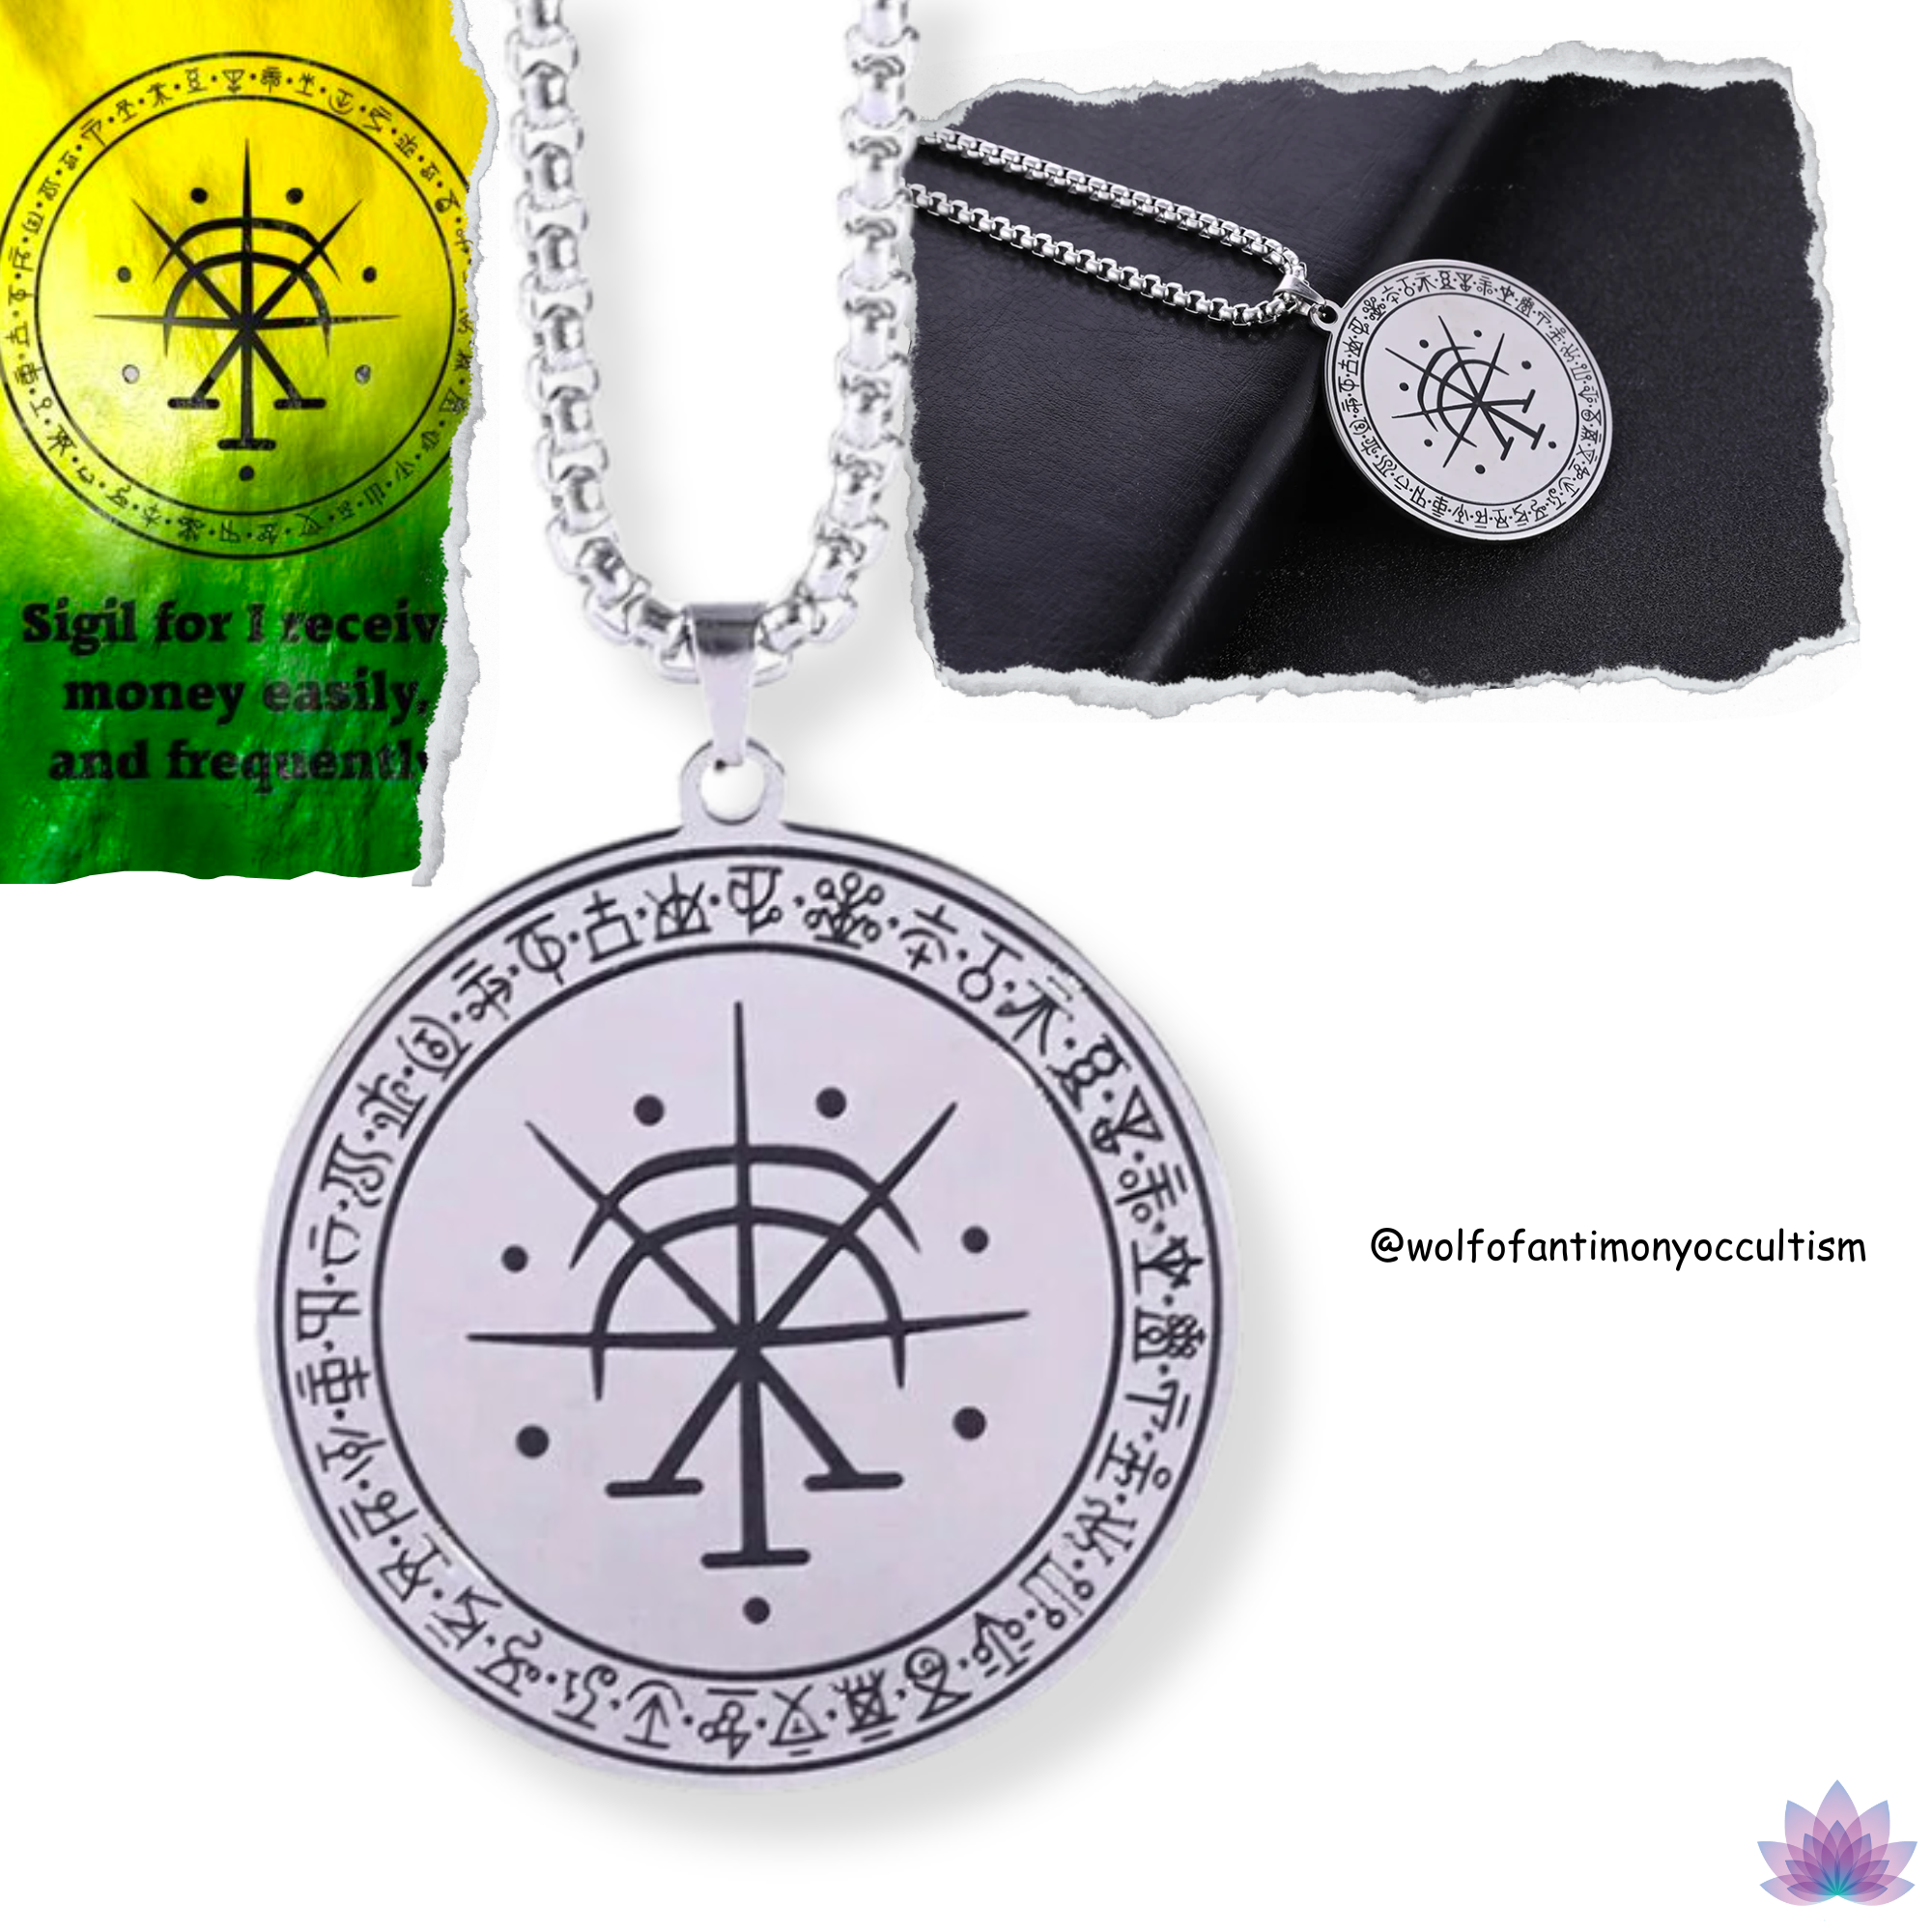 Wolf Of Antimony's Money Success Sigil Necklace • Wealth Luck Attraction Viadescioism Pendant • Chaos Magick Amulet Neo-Pagan Witch Talisman